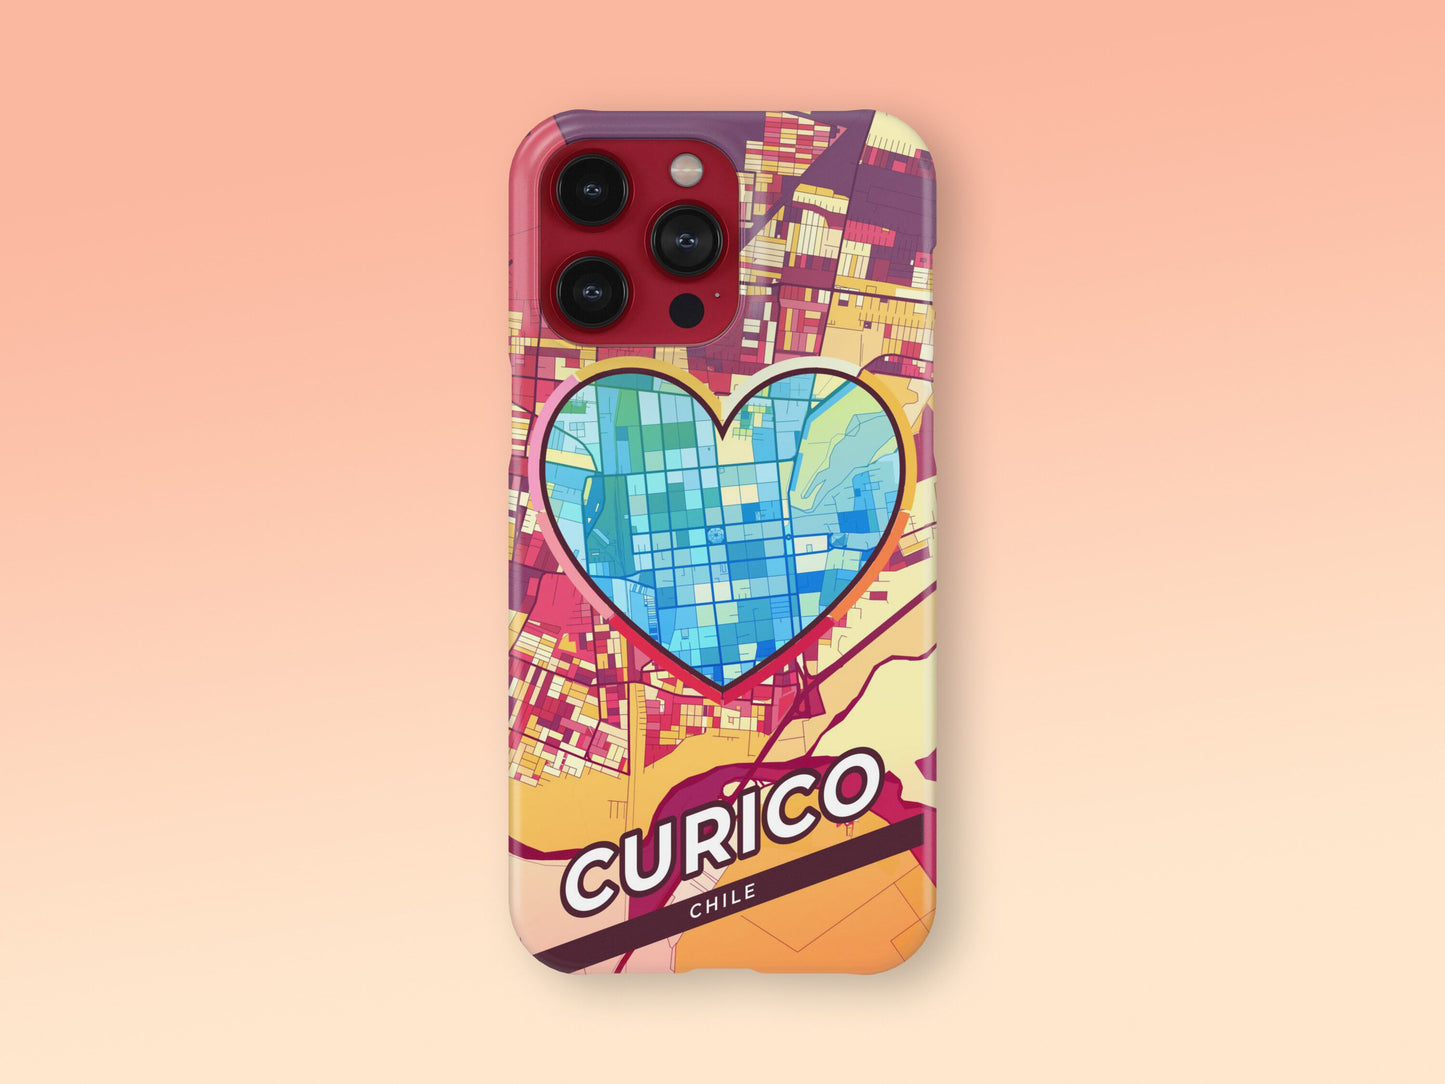 Curico Chile slim phone case with colorful icon. Birthday, wedding or housewarming gift. Couple match cases. 2